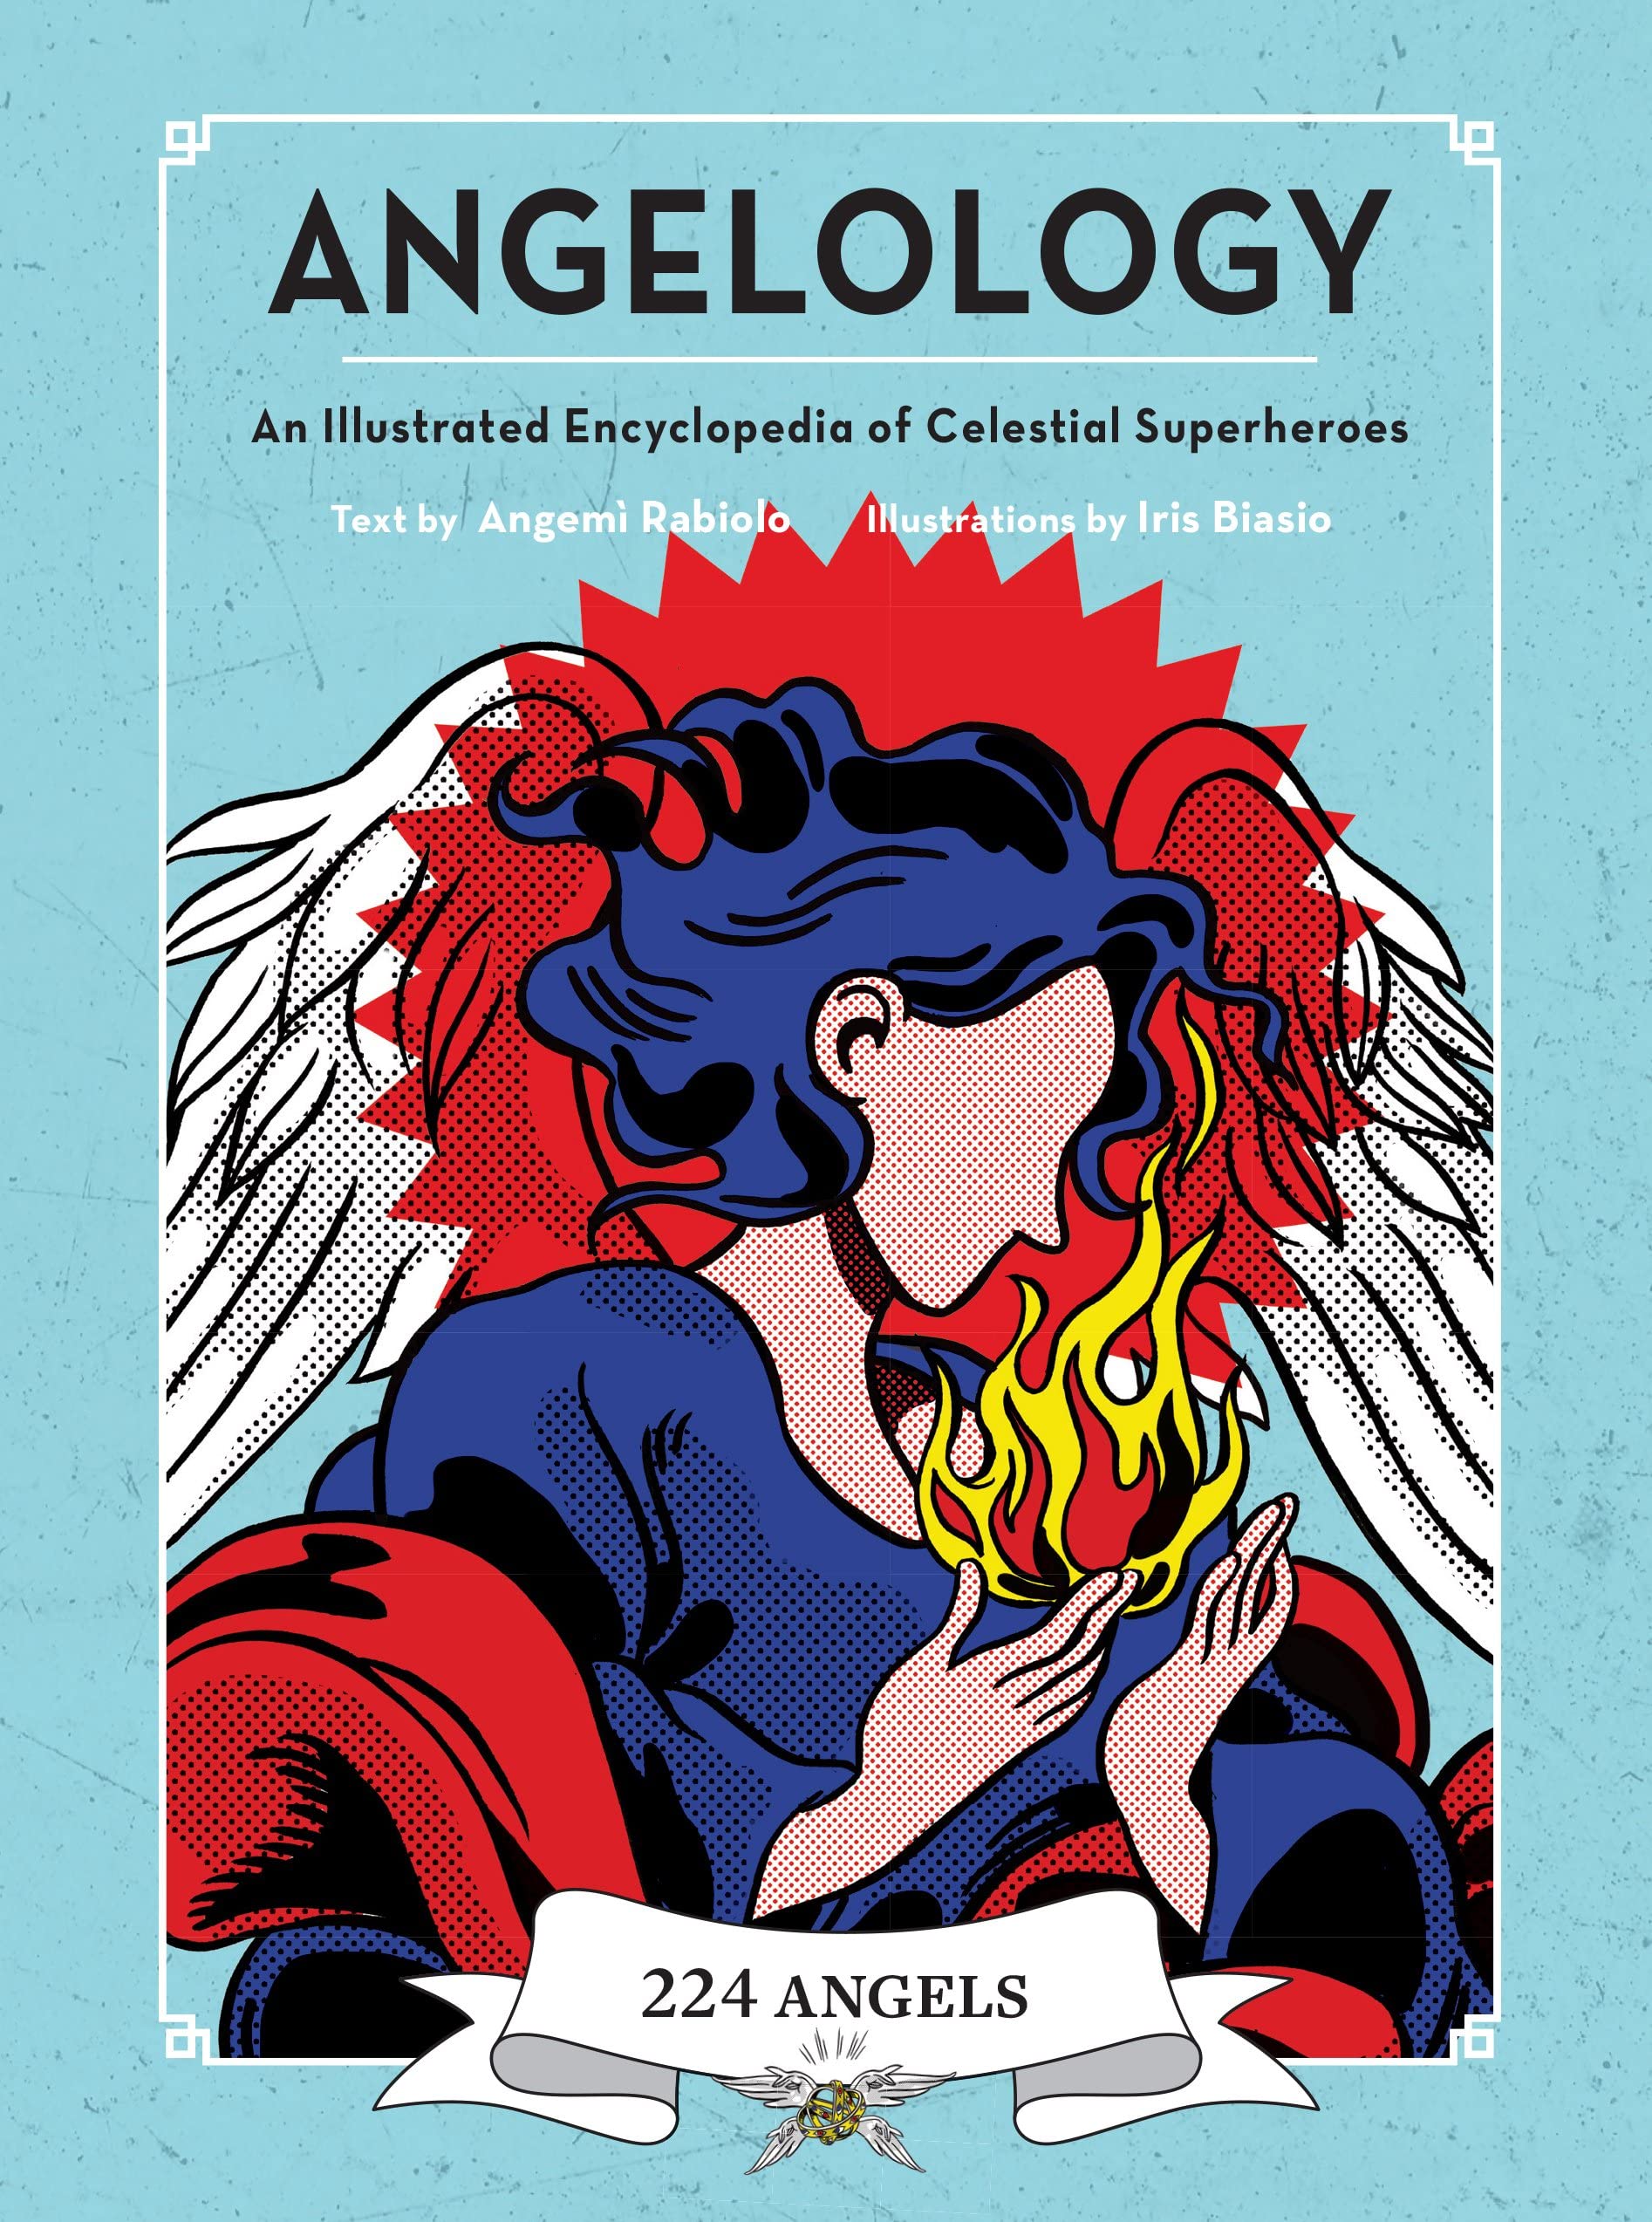 Angelology: An Illustrated Encyclopedia of Celestial Superheroes